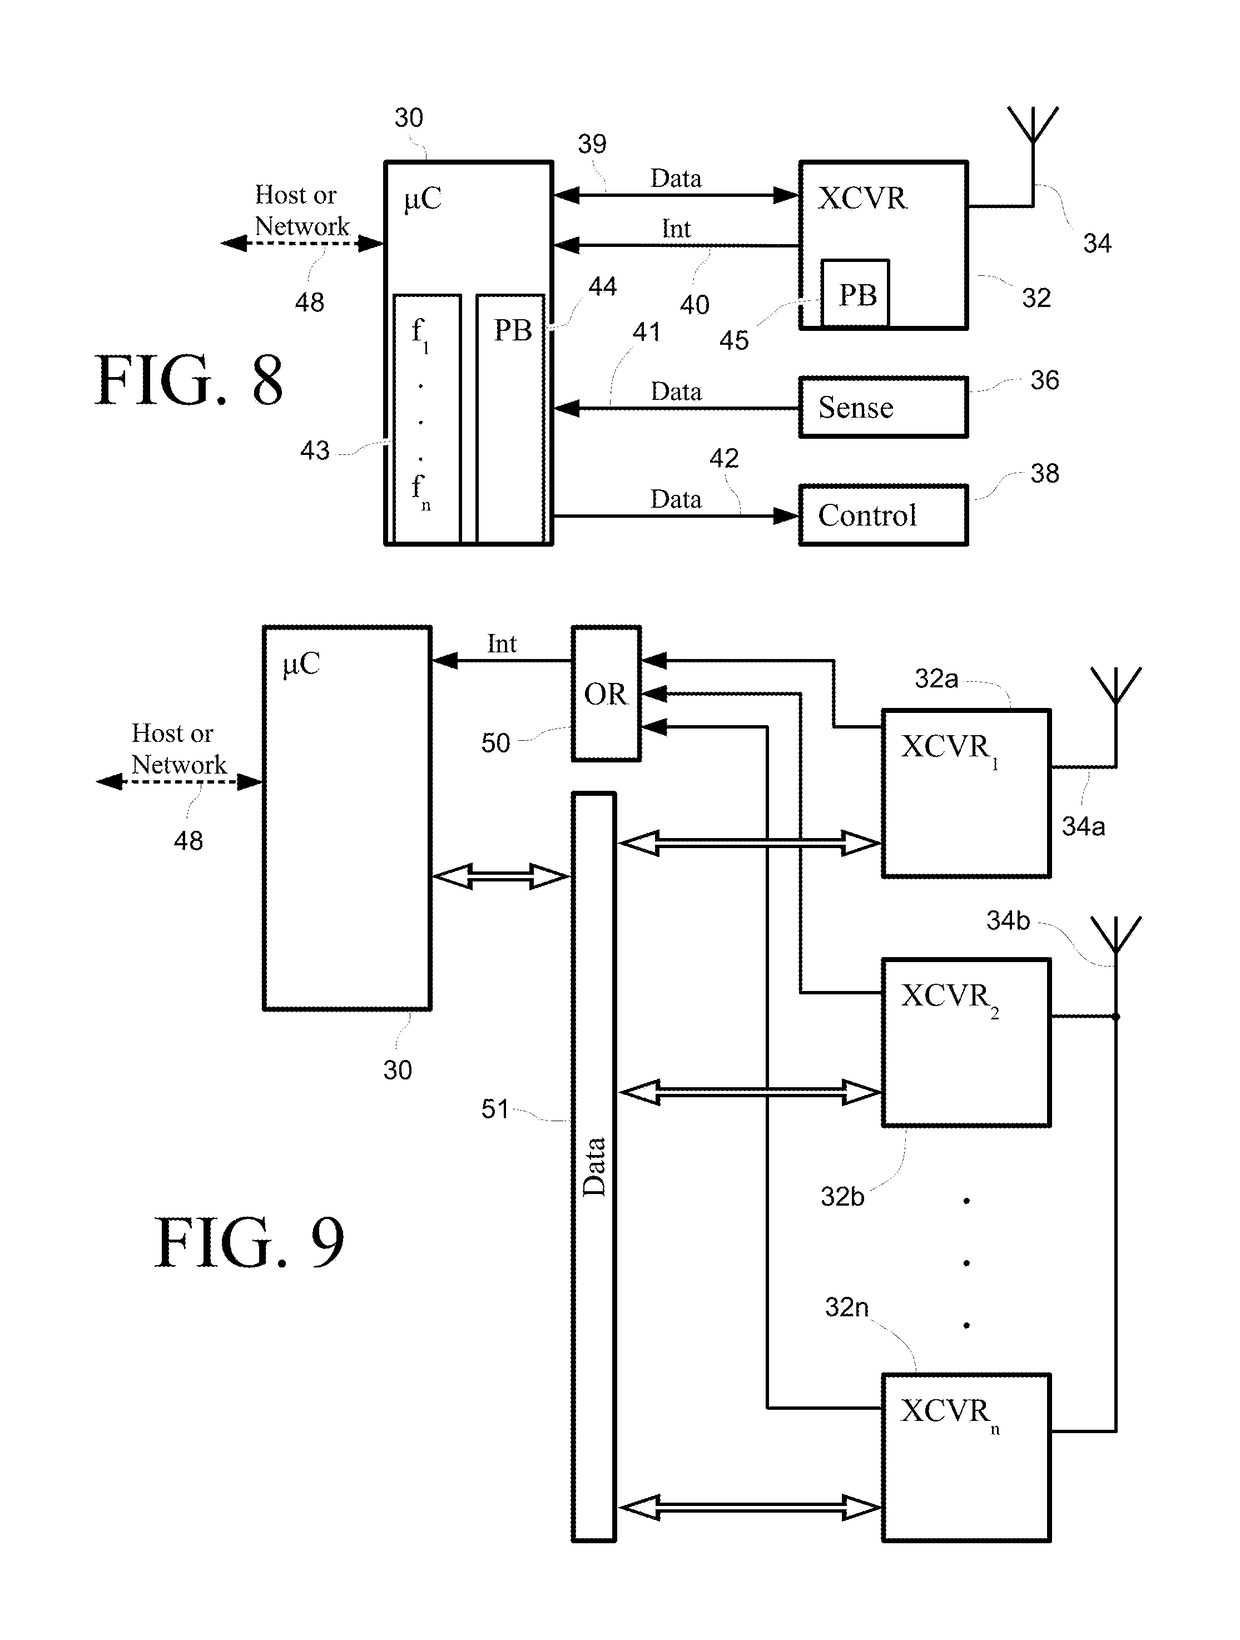 Deployment and communications test of intermediate-range devices using a short-range wireless mobile device